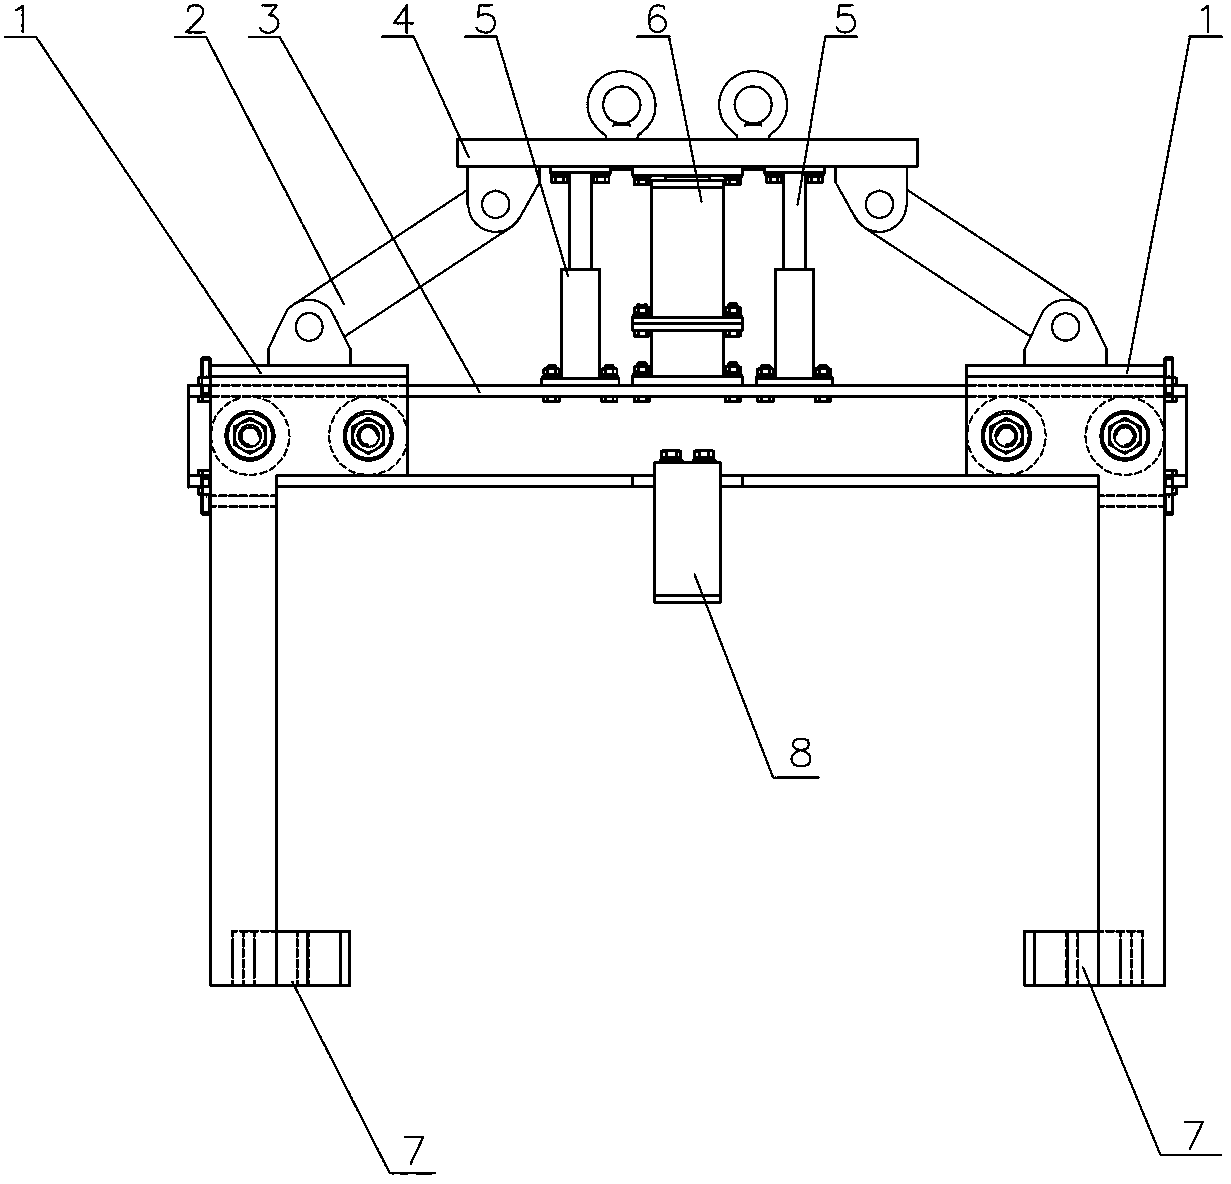 Machine lifting tool for automatically grabbing and releasing goods